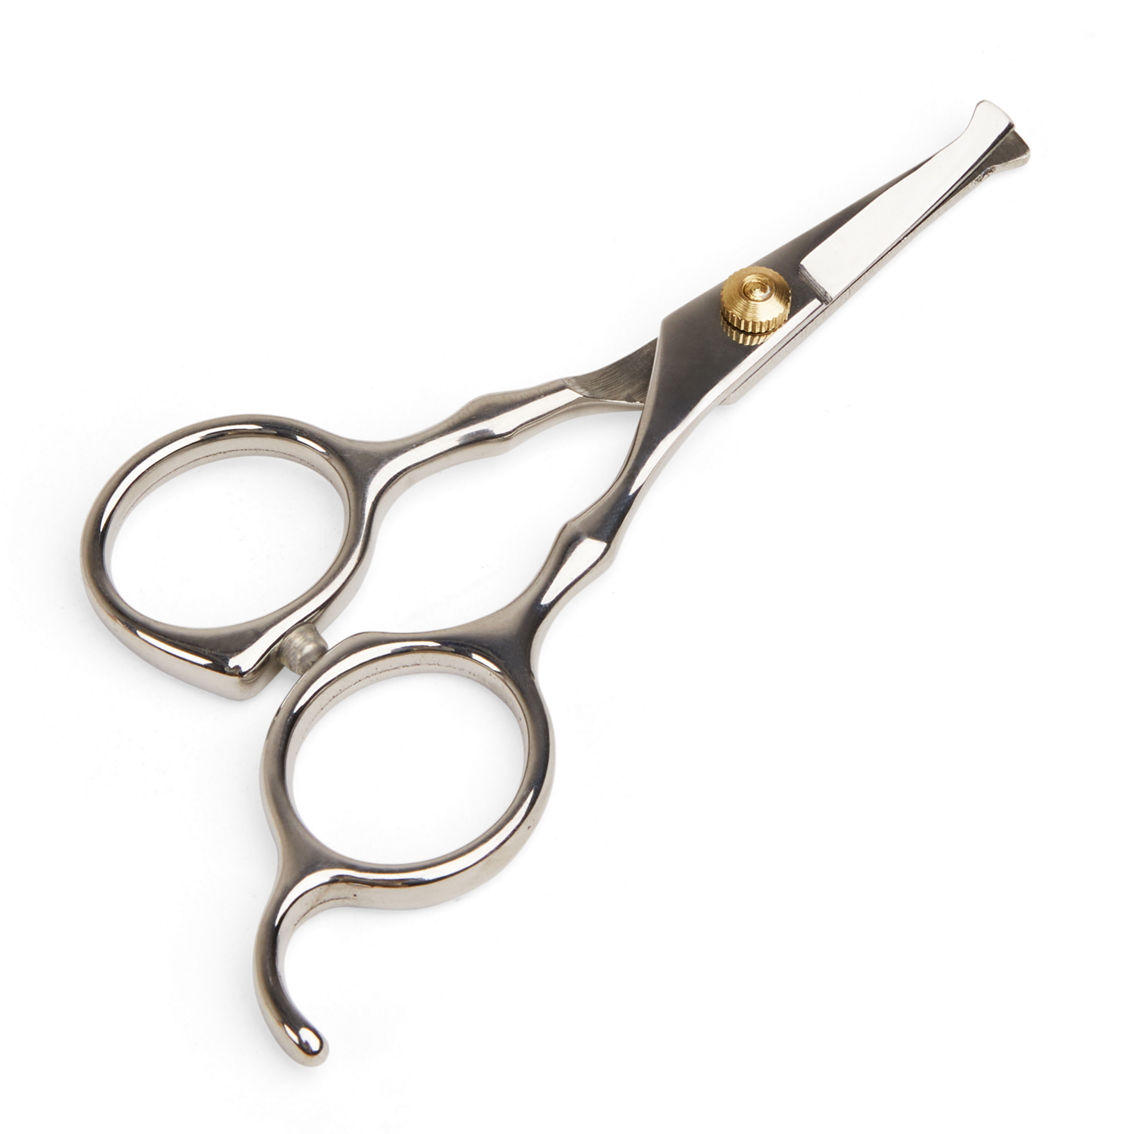 Well & Good Facial Shears for Dogs - Image 2 of 2